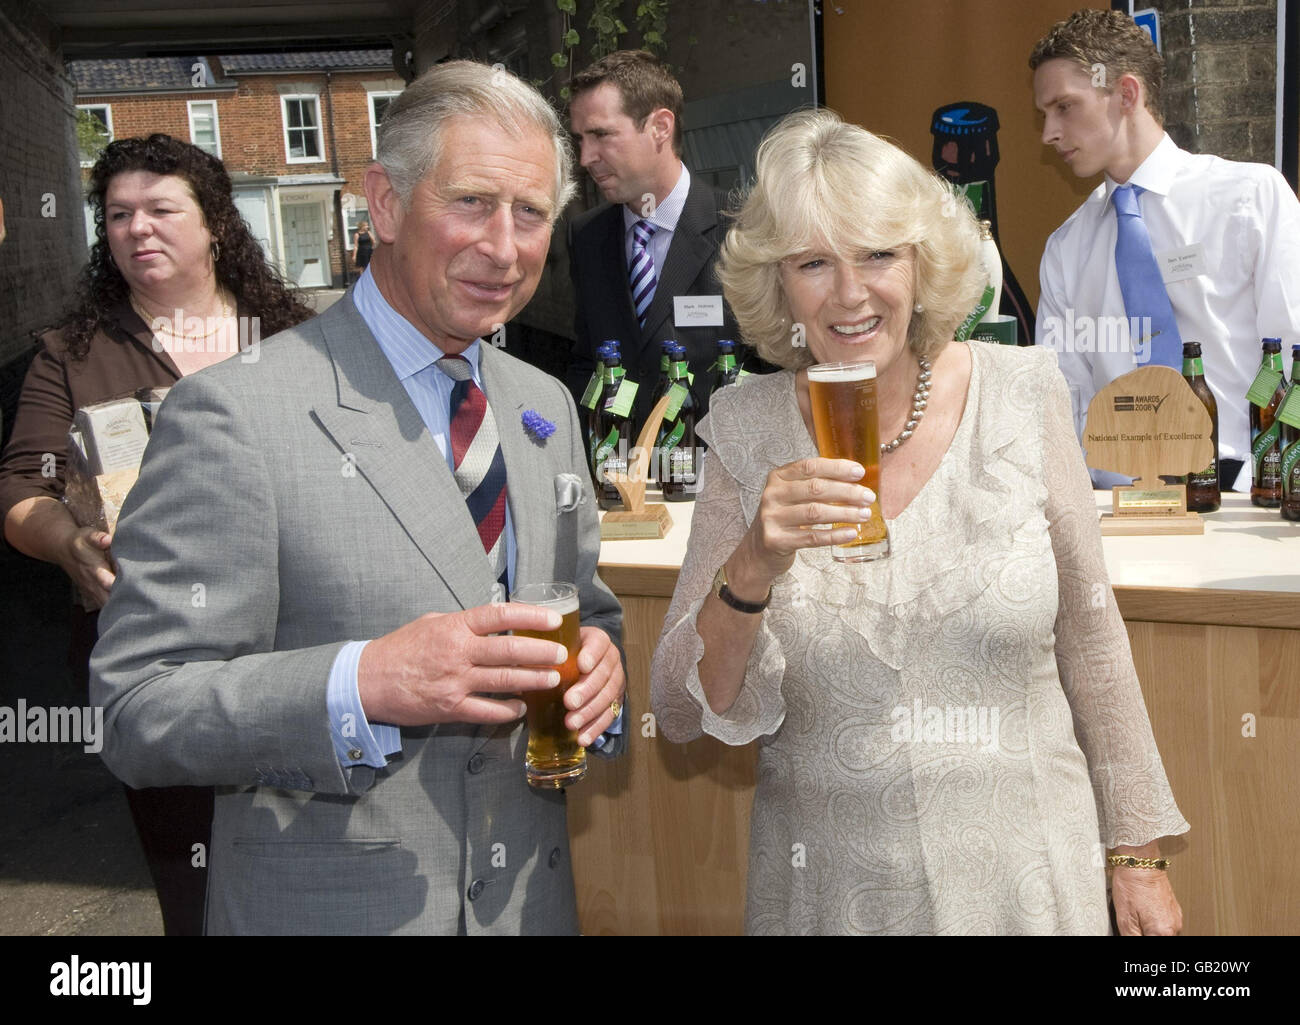 The Prince of Wales and Duchess of Cornwall sample some carbon neutral beer from Adnams Brewery, outside the Swan Hotel, as part of a tour of Southwold. Stock Photo